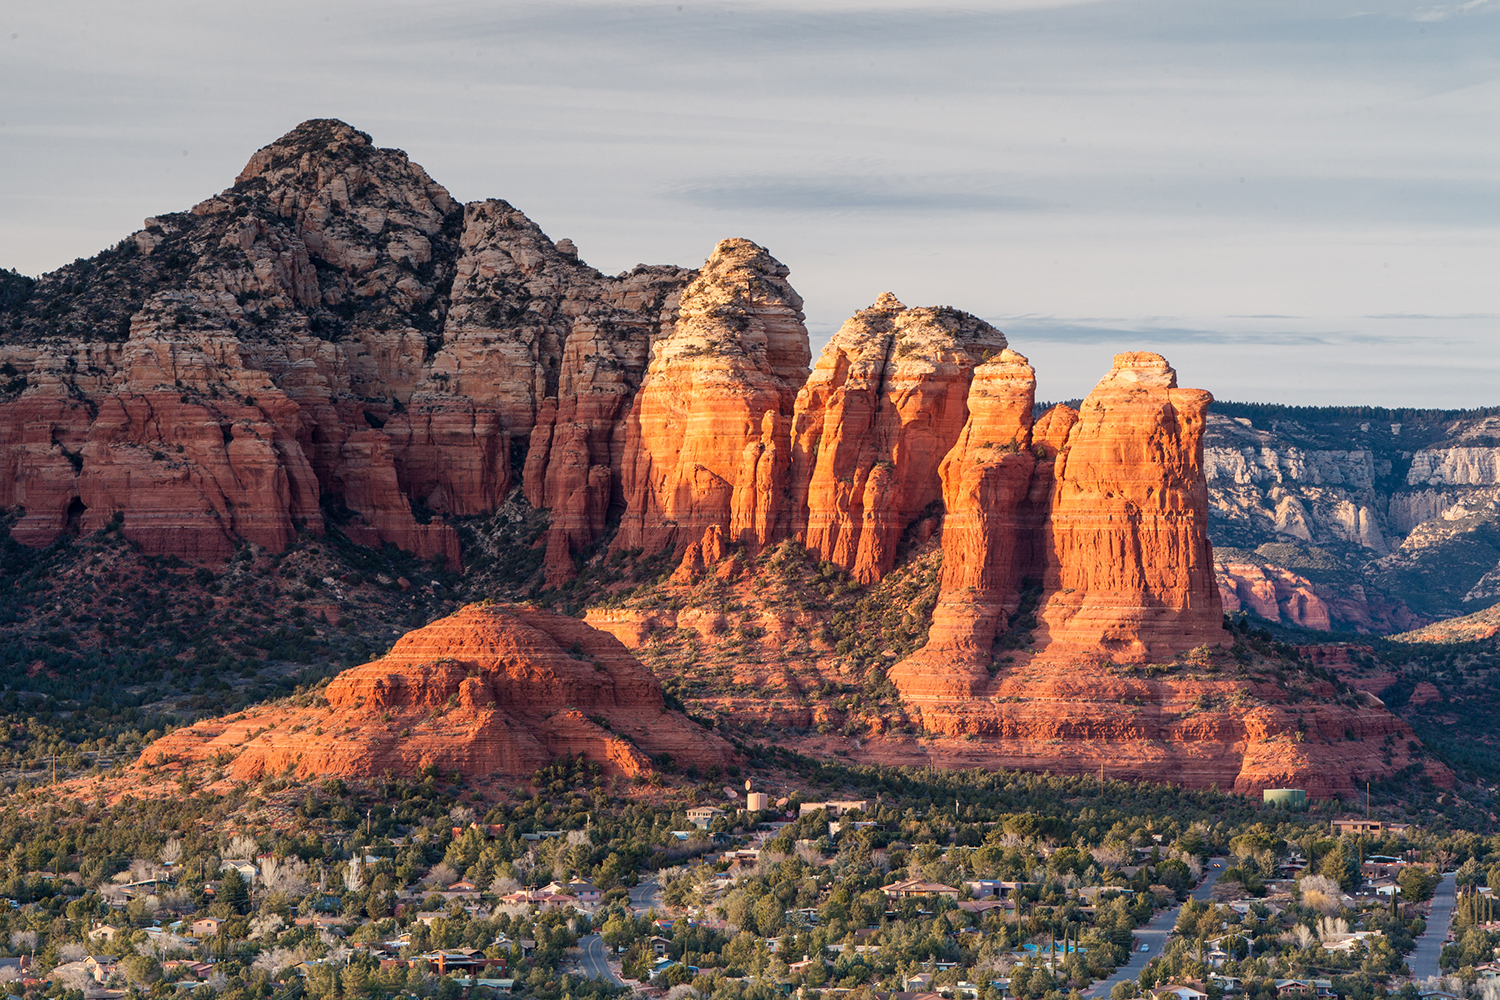 View from Airport Mesa in Sedona at sunset